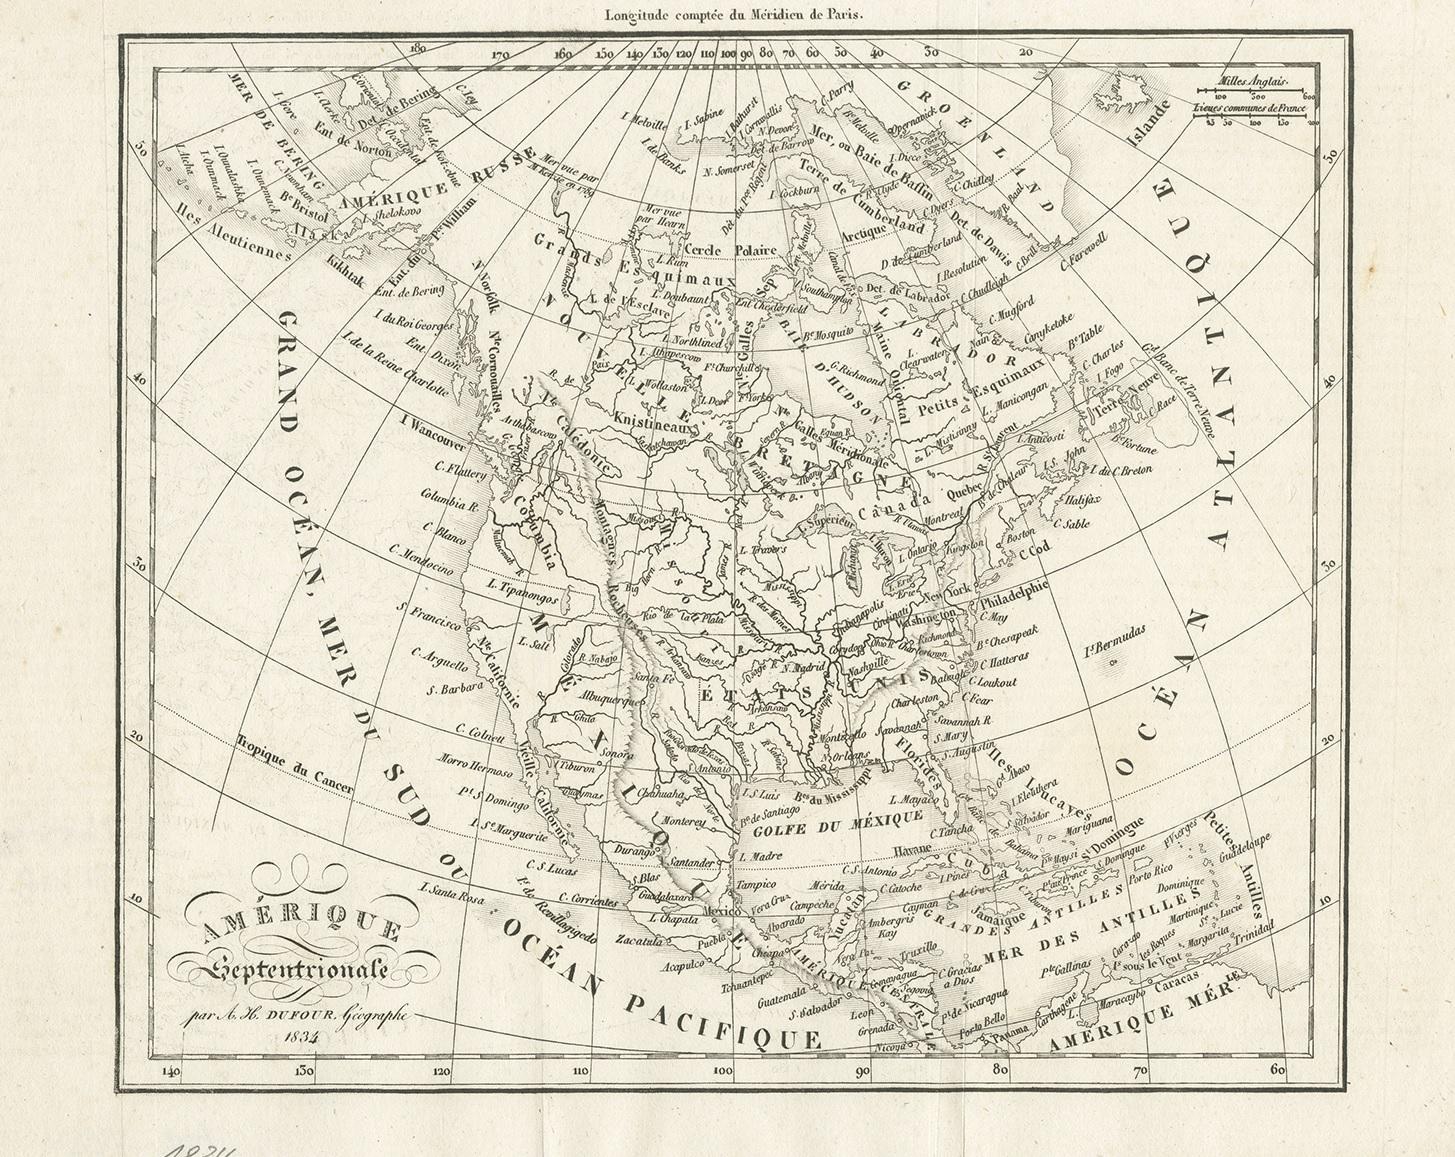 Antique map titled 'Amérique Septentrionale'. Uncommon map of North America. Published by or after A.H. Dufour, circa 1834. Source unknown, to be determined.